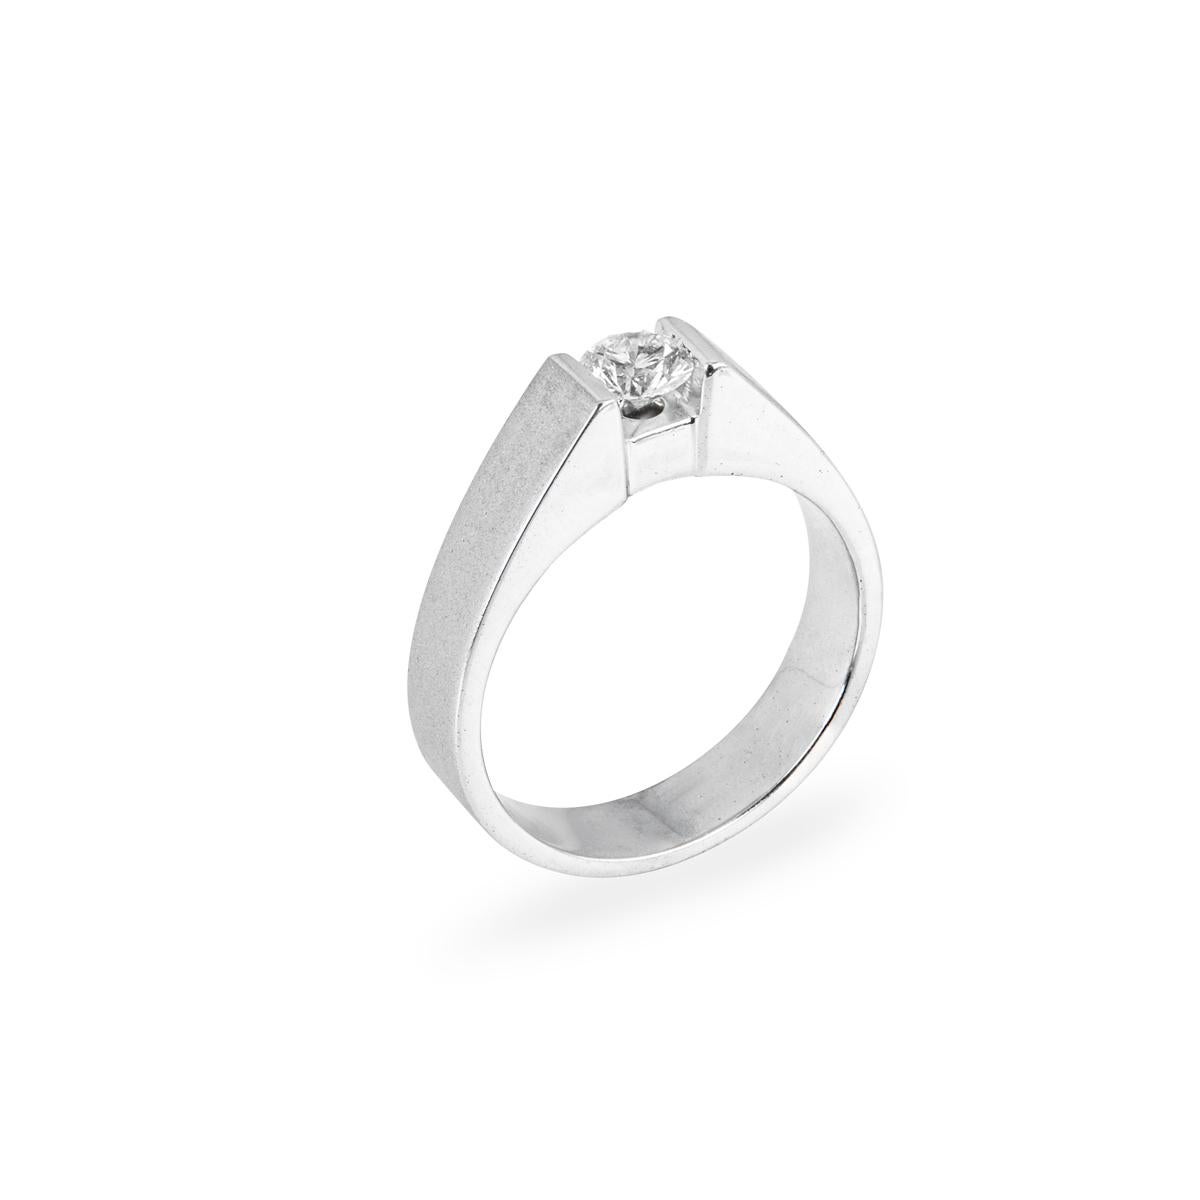 A contemporary 18k white gold round brilliant cut diamond ring. The 0.47ct round brilliant cut diamond is tension set within a sateen finish mount. The diamond is H colour and clarity is SI1 clarity. The ring is currently a size UK R / EU 59 but can